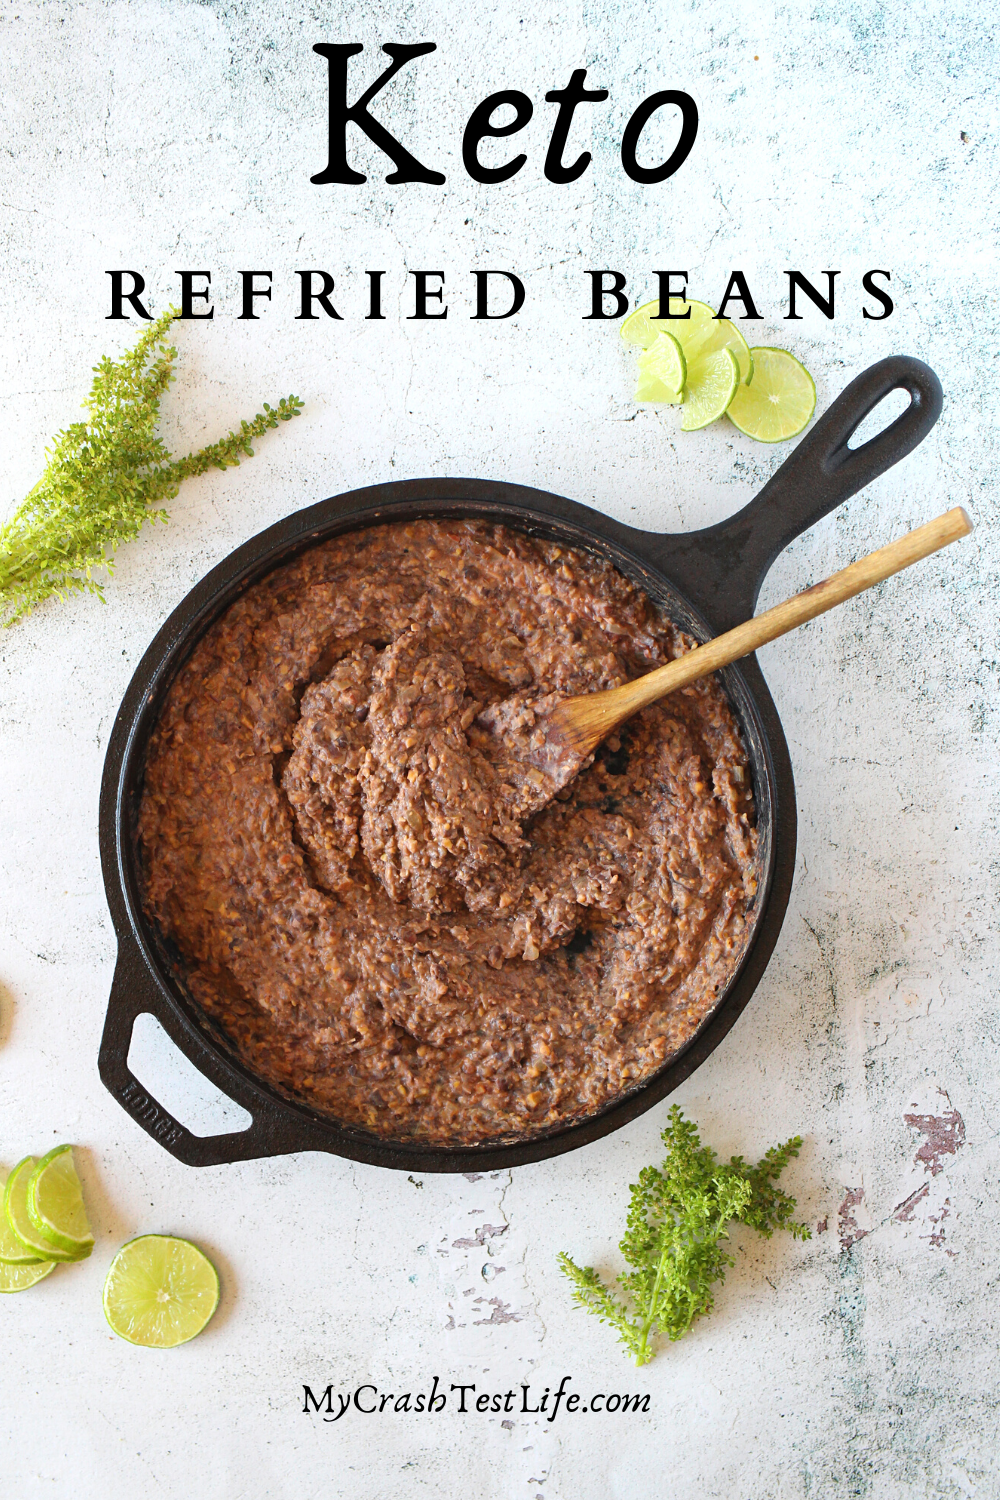 easy keto refried beans recipe that is a healthy keto recipe